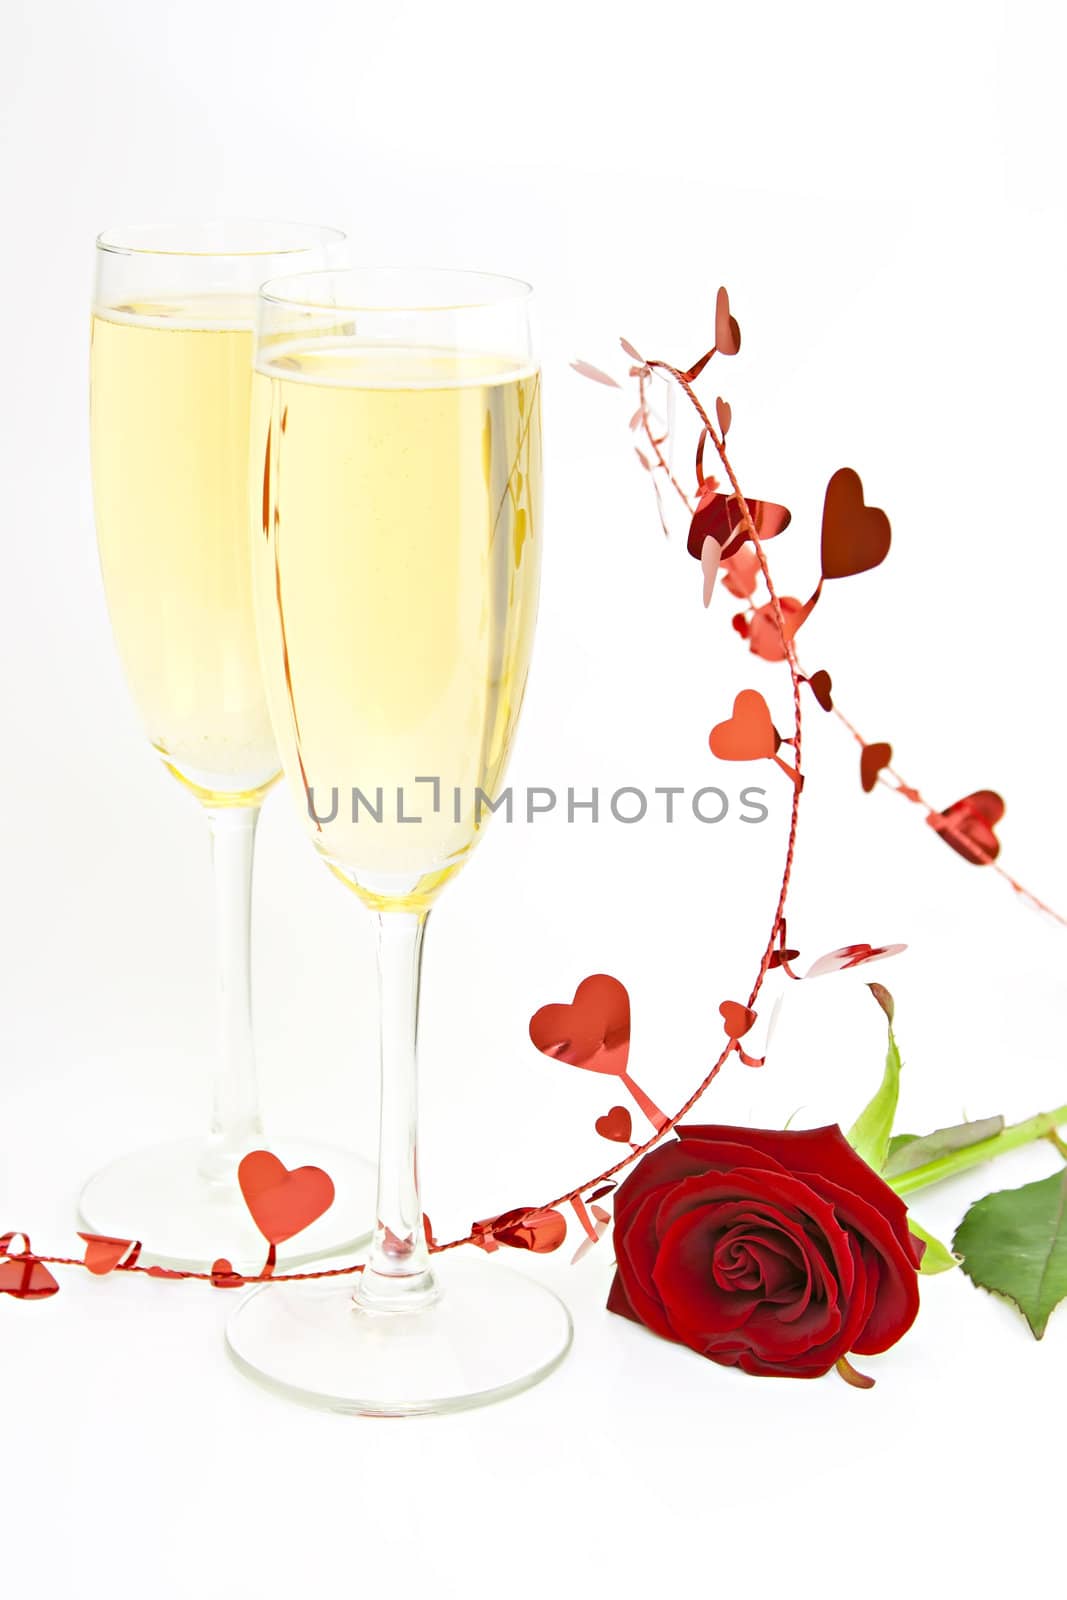 Champagne and red rose. by gitusik